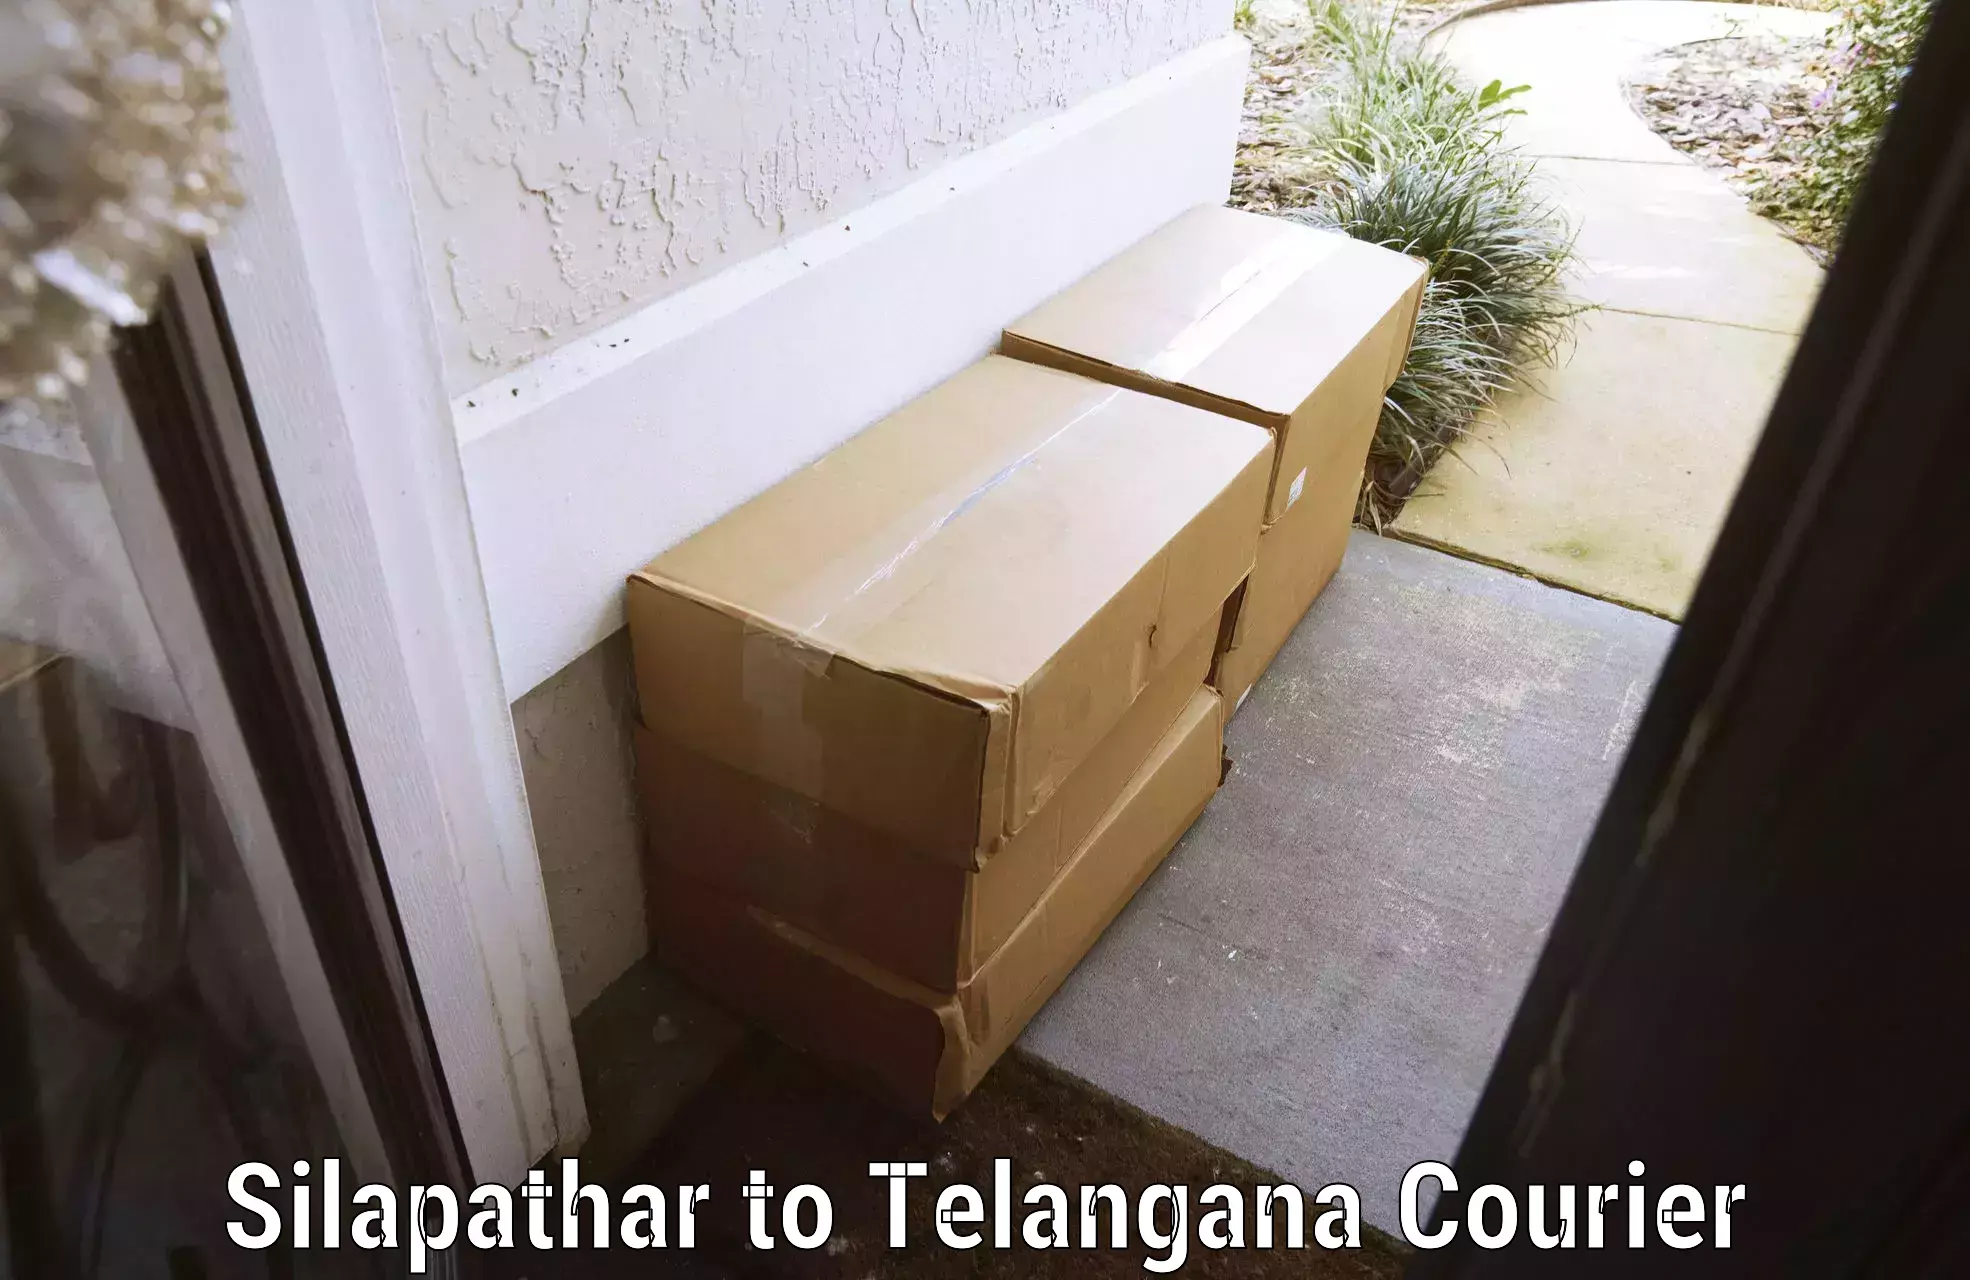 Luggage delivery system Silapathar to Sultanabad